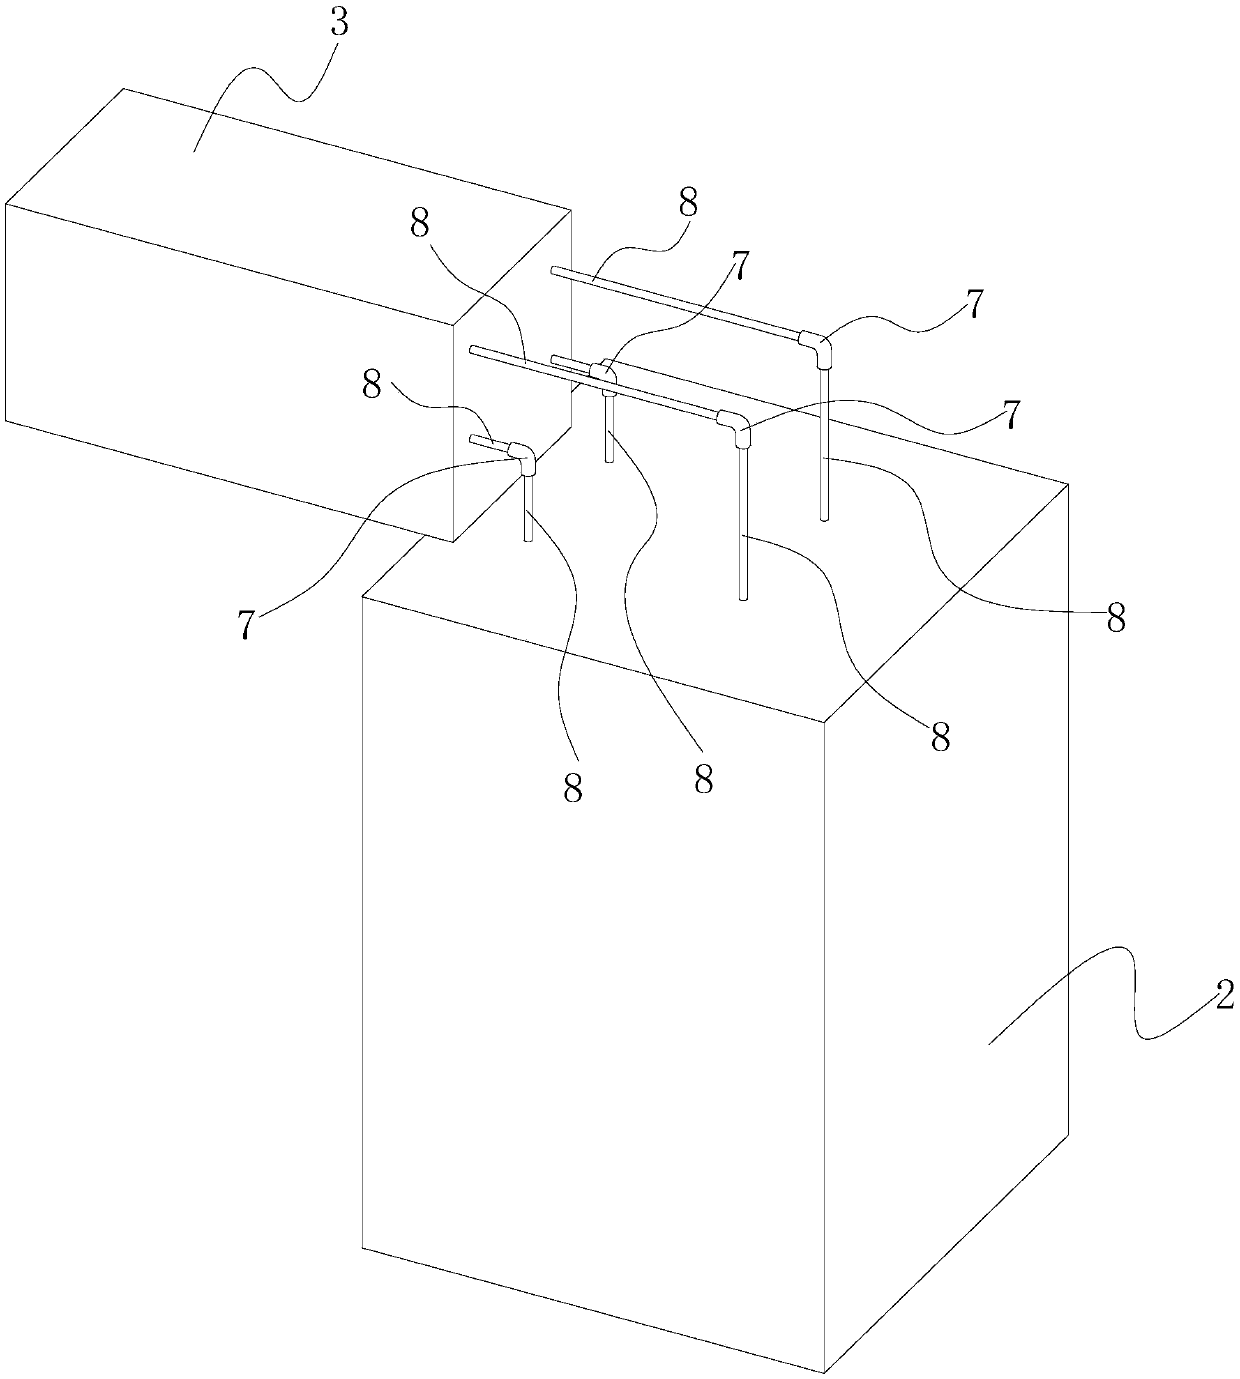 Connecting structure of prefabricated building